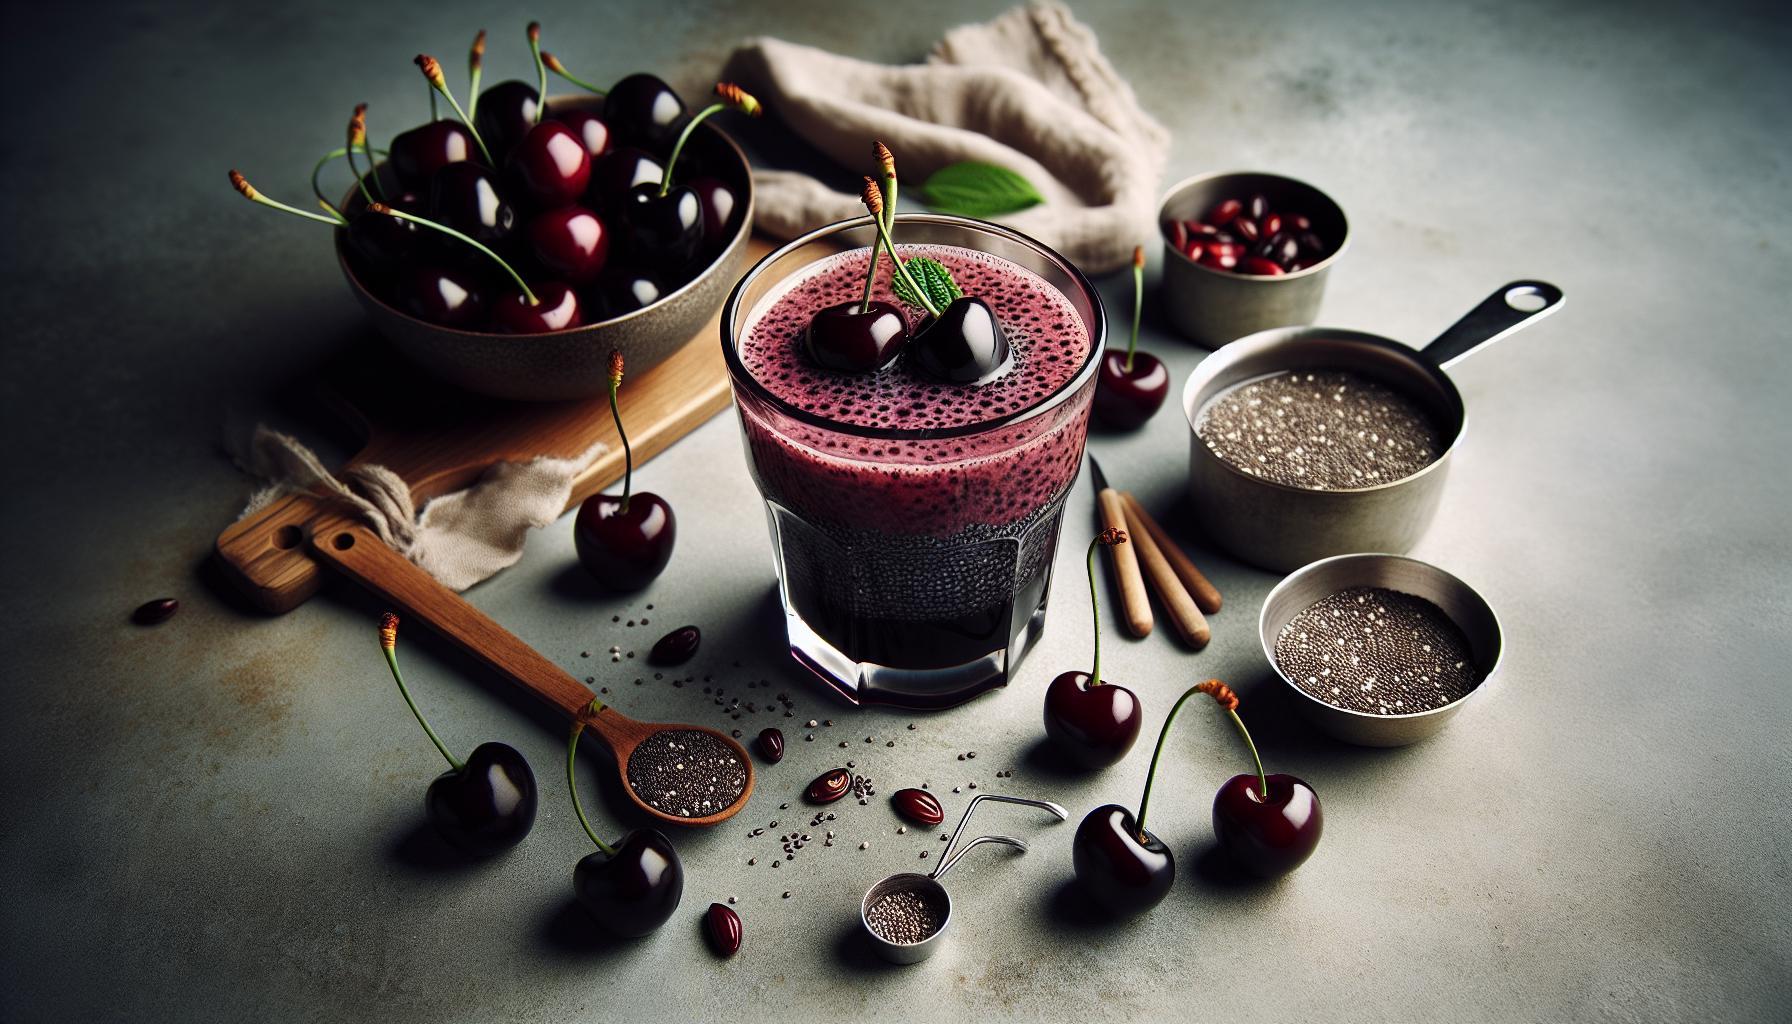 Revitalize Your Day: Wholesome Black Cherry and Chia Seed Gel Drink Recipe!